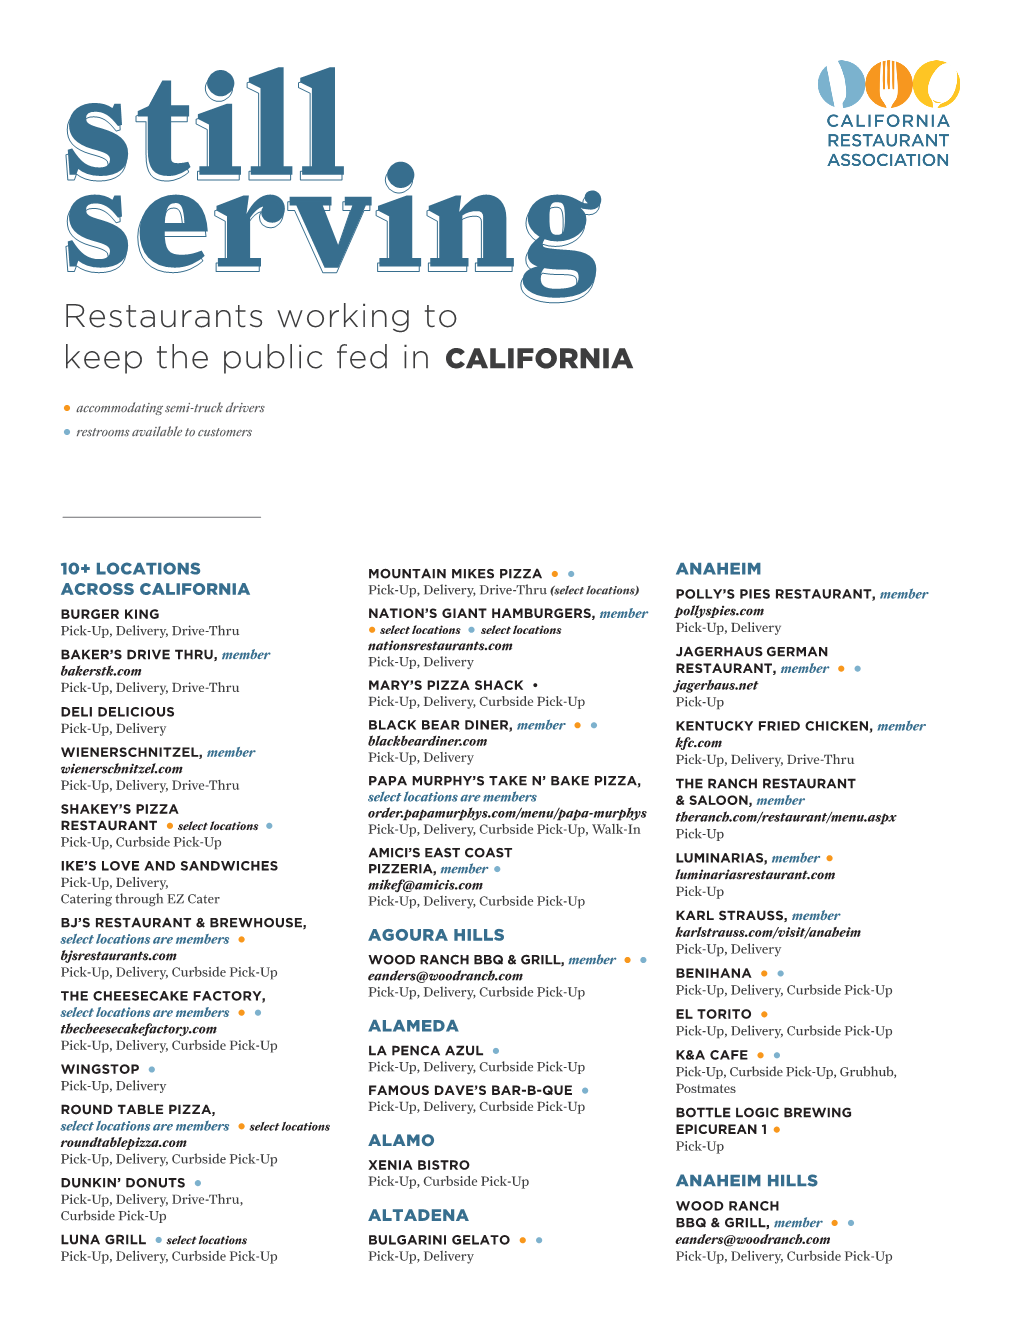 Restaurants Working to Keep the Public Fed in CALIFORNIA